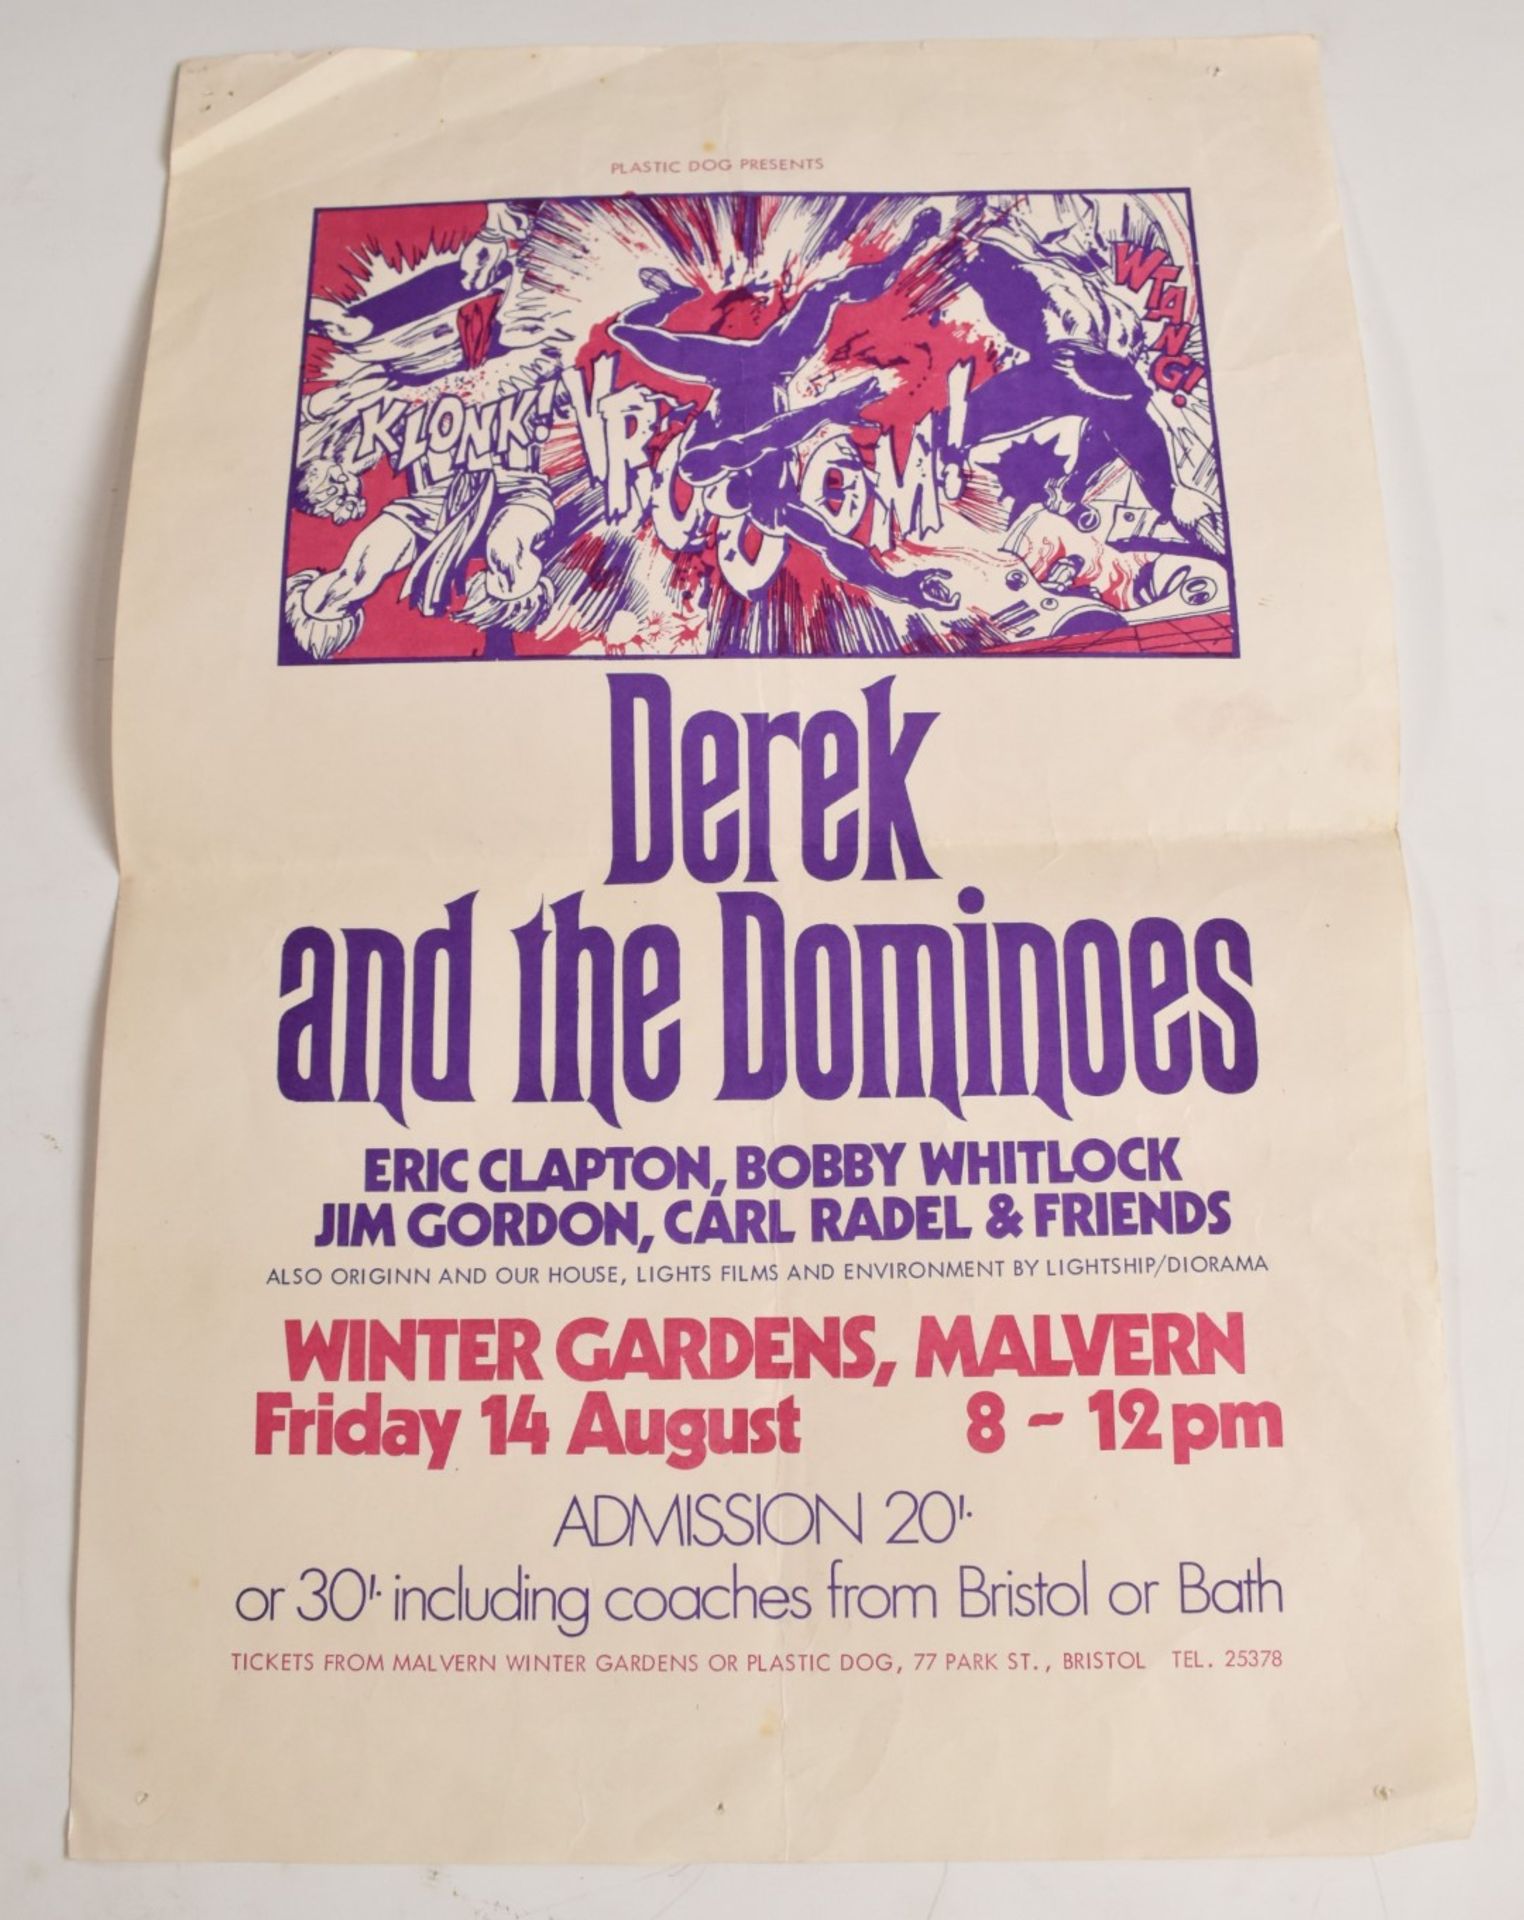 Poster for Derek and the Dominoes featuring Eric Clapton and others at the Winter Gardens,